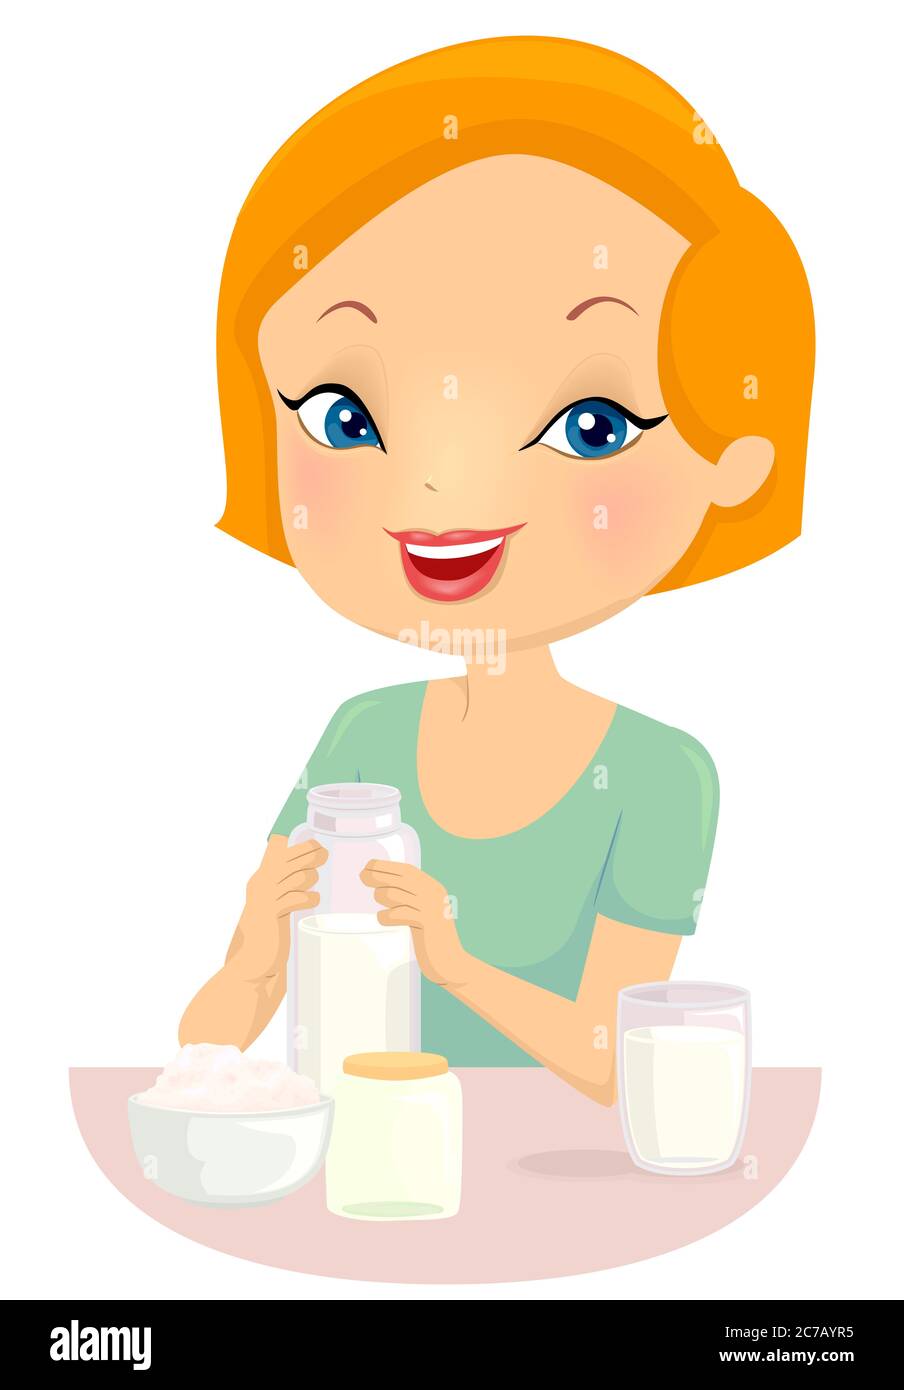 Illustration of a Girl Making Kefir at Home with Bottles, Milk and Kefir Grains Stock Photo